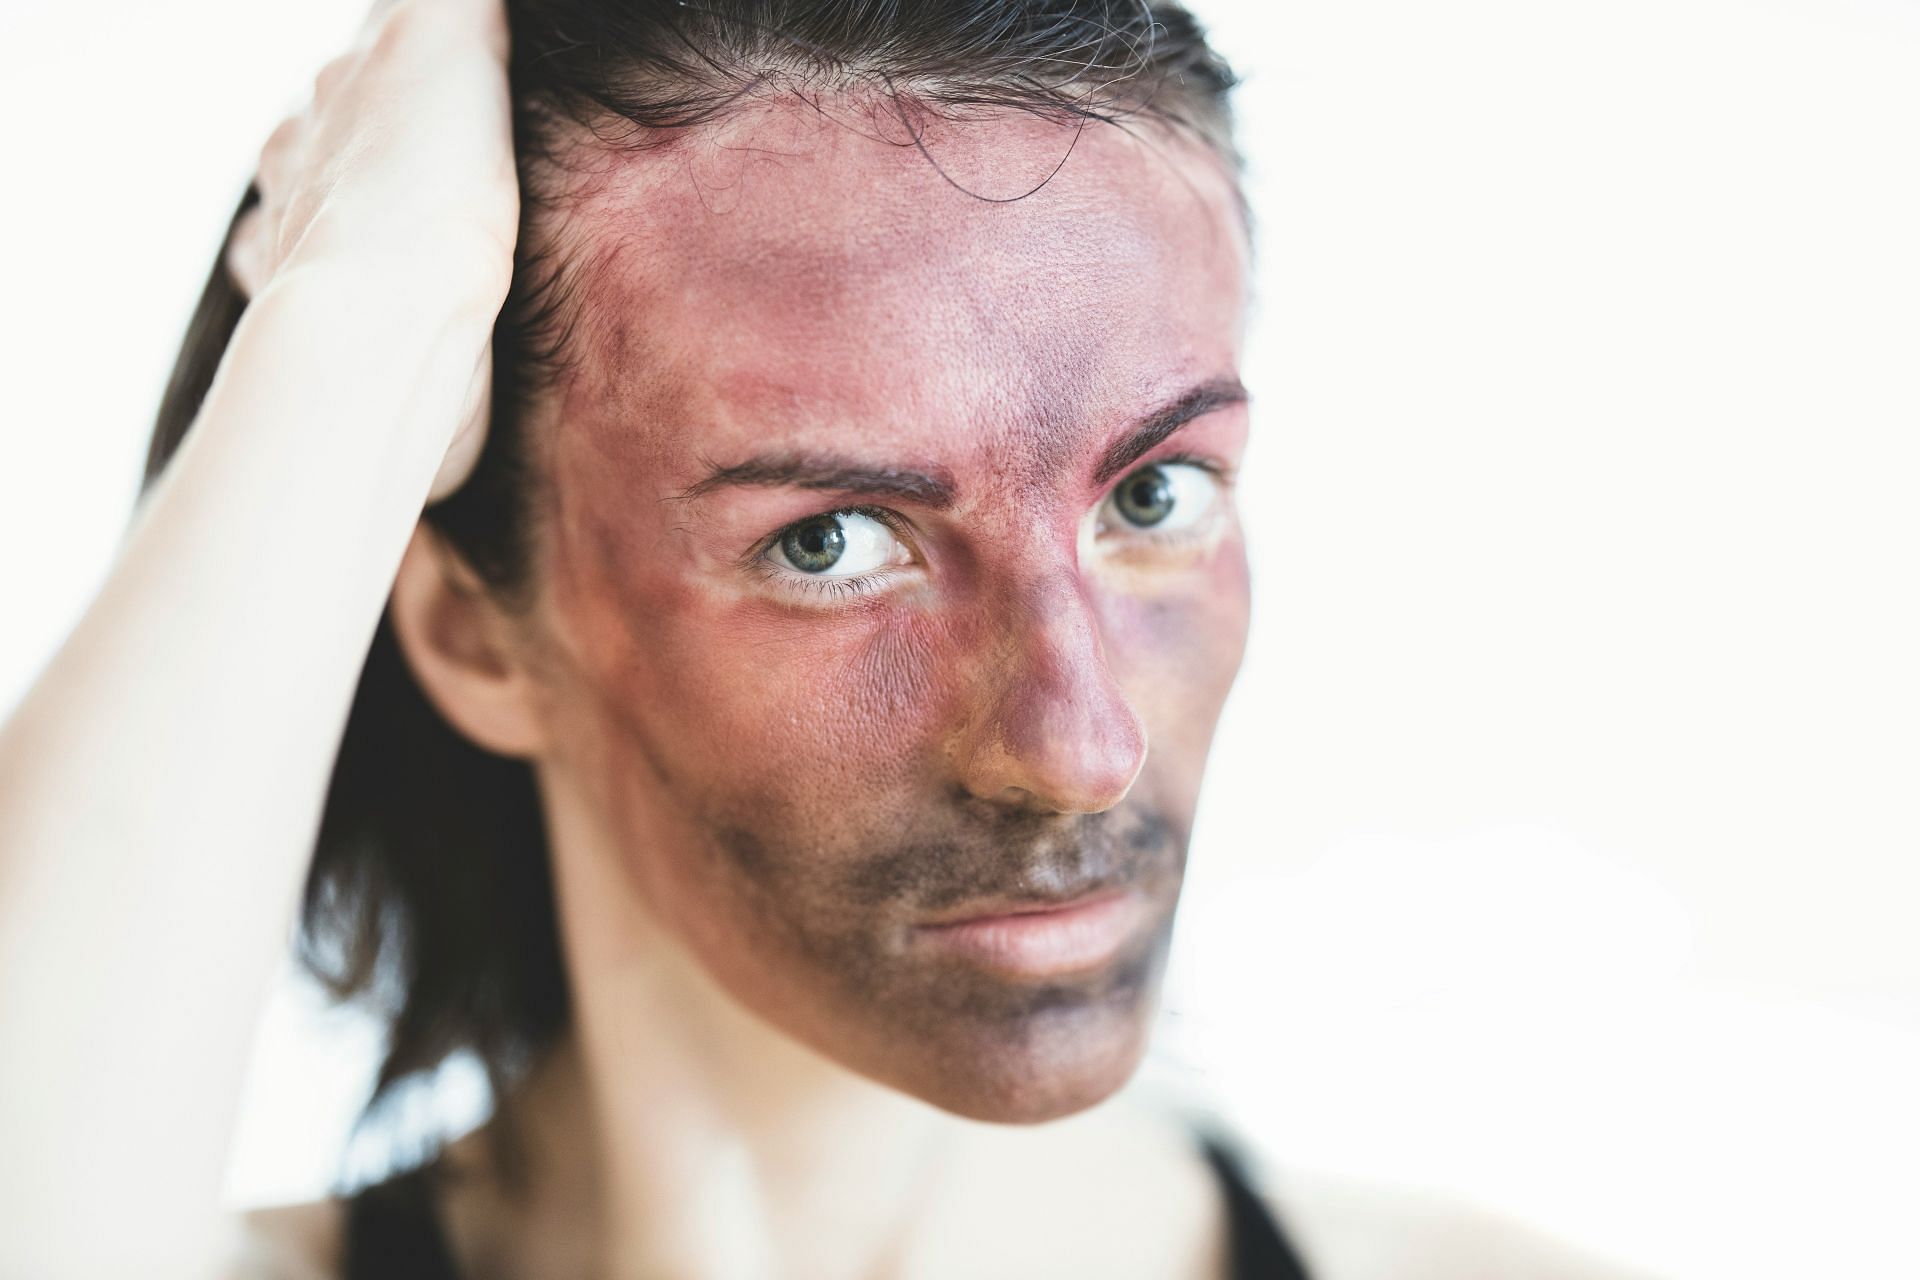 Skin redness can be caused because of this condition. (Image by Engin Akyurt/Unsplash)